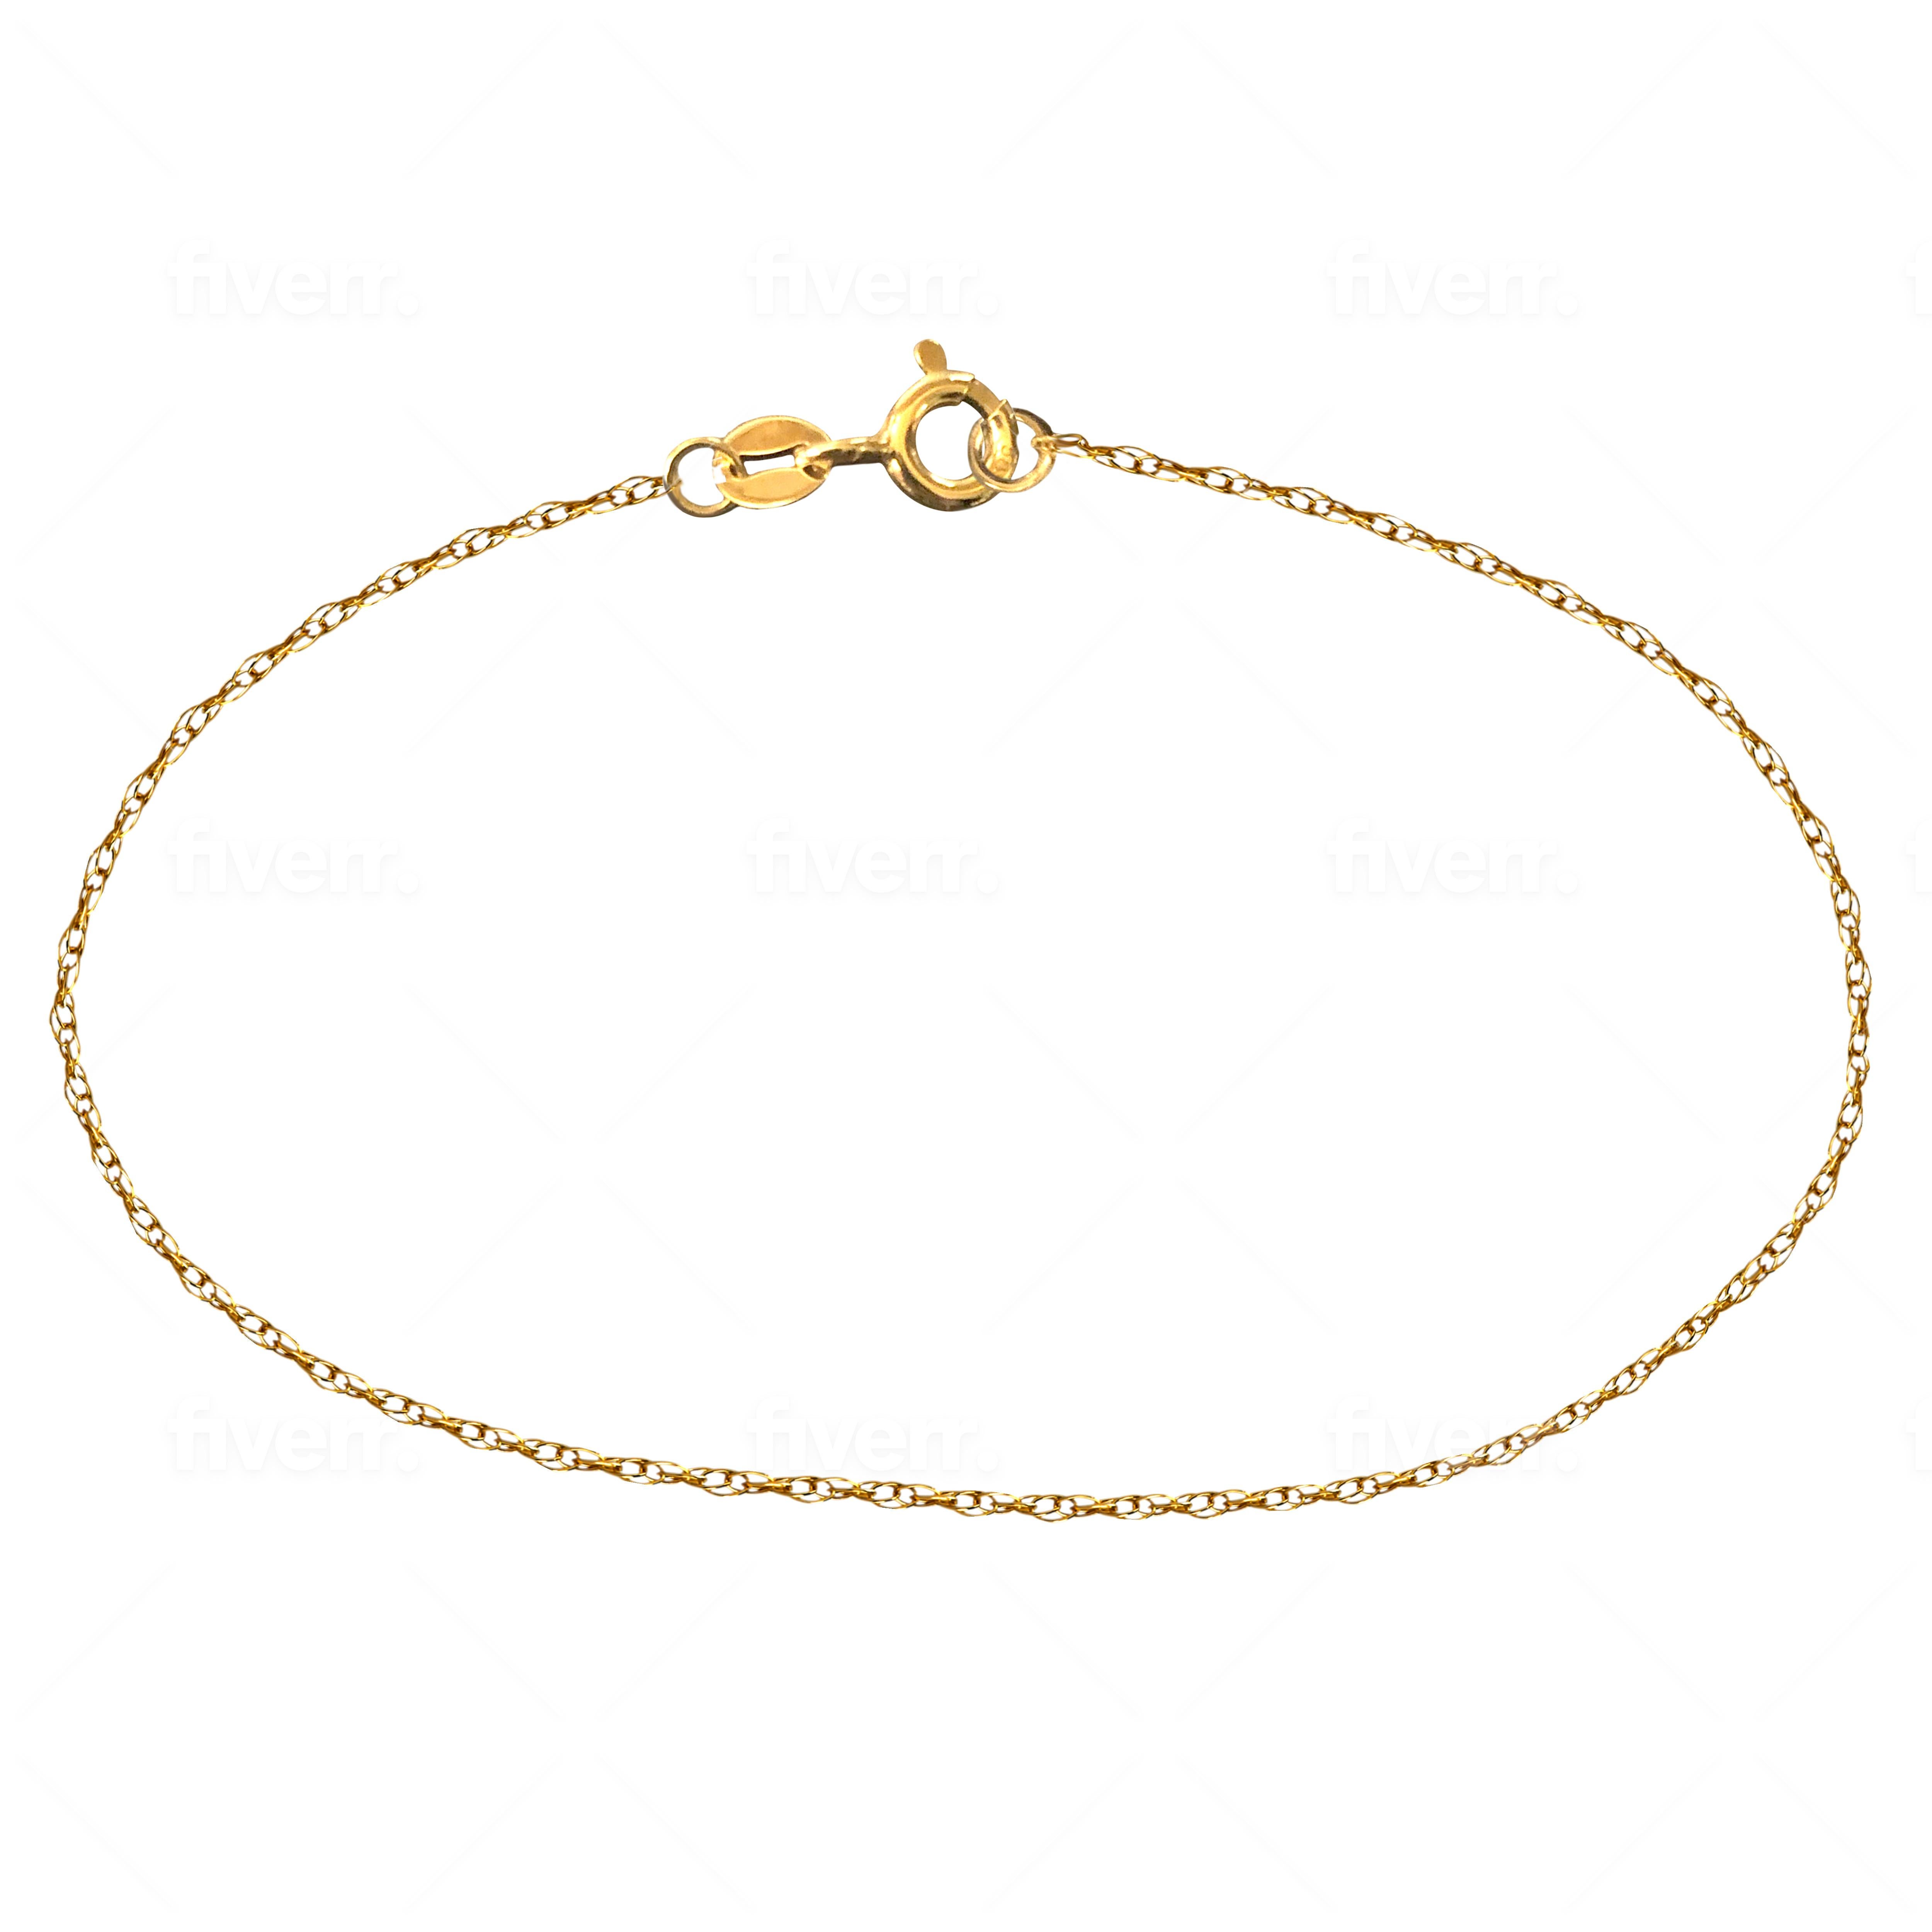 Real Solid 14k Yellow Gold Rope Bracelet Chain Diamond Cut Women Tennis Eternity In New Condition For Sale In New York, NY